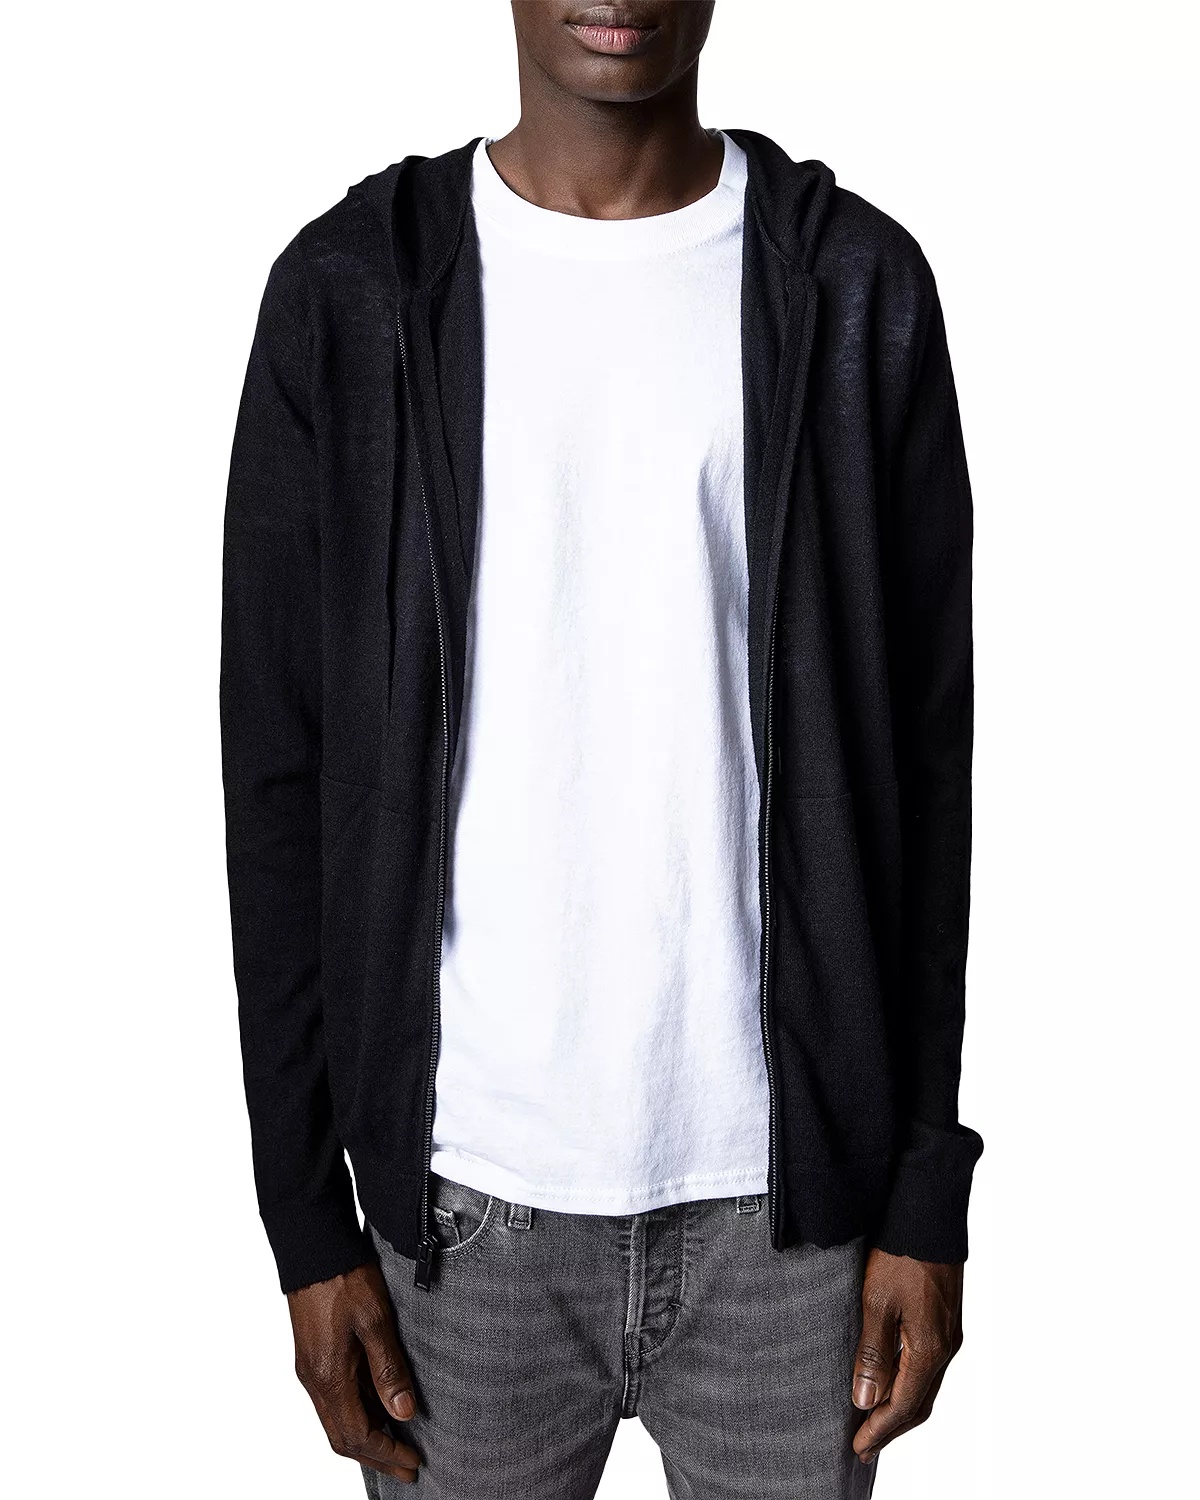 Clash Cashmere Hooded Cardigan - 2